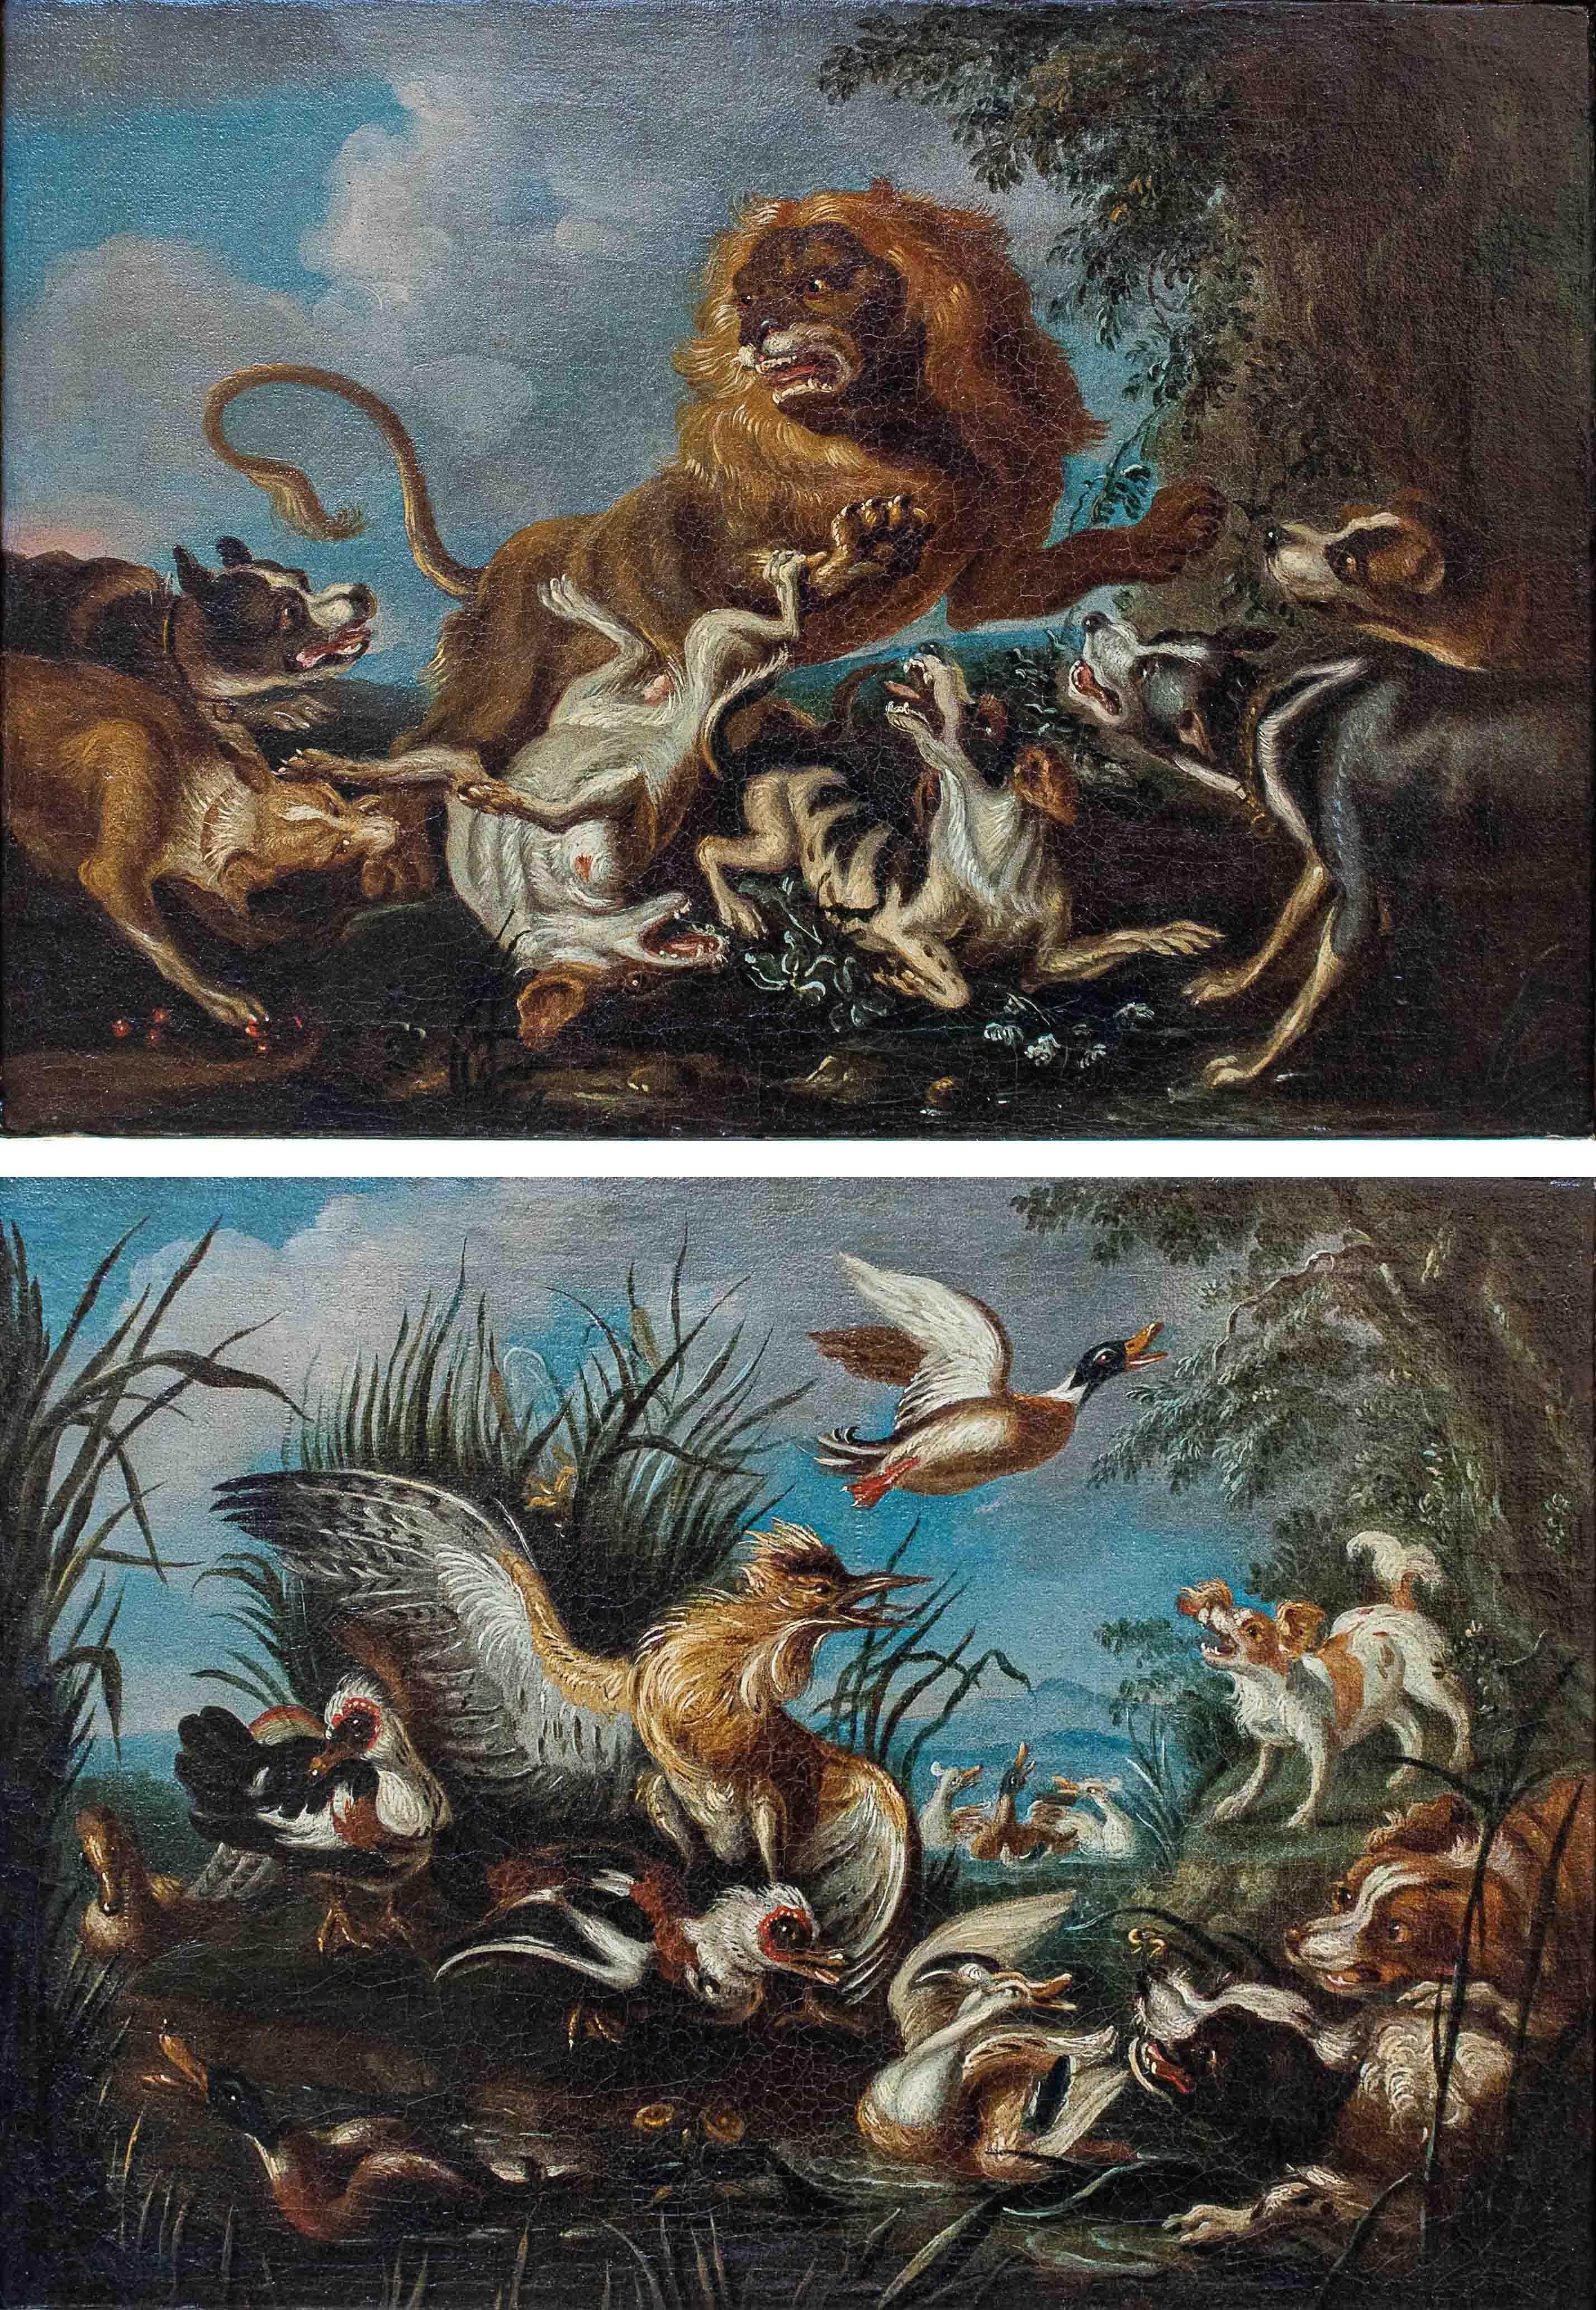 Angelo Maria Crivelli, known as il Crivellone (active in Milan between 1690 and 1730)
Lion hunt
Birds in a pond being harassed by dogs
Measures: (2) Oil on canvas, 44.5 x 32.3 cm - with frame, 47.5 x 60 x 5.2 cm

Even a superficial